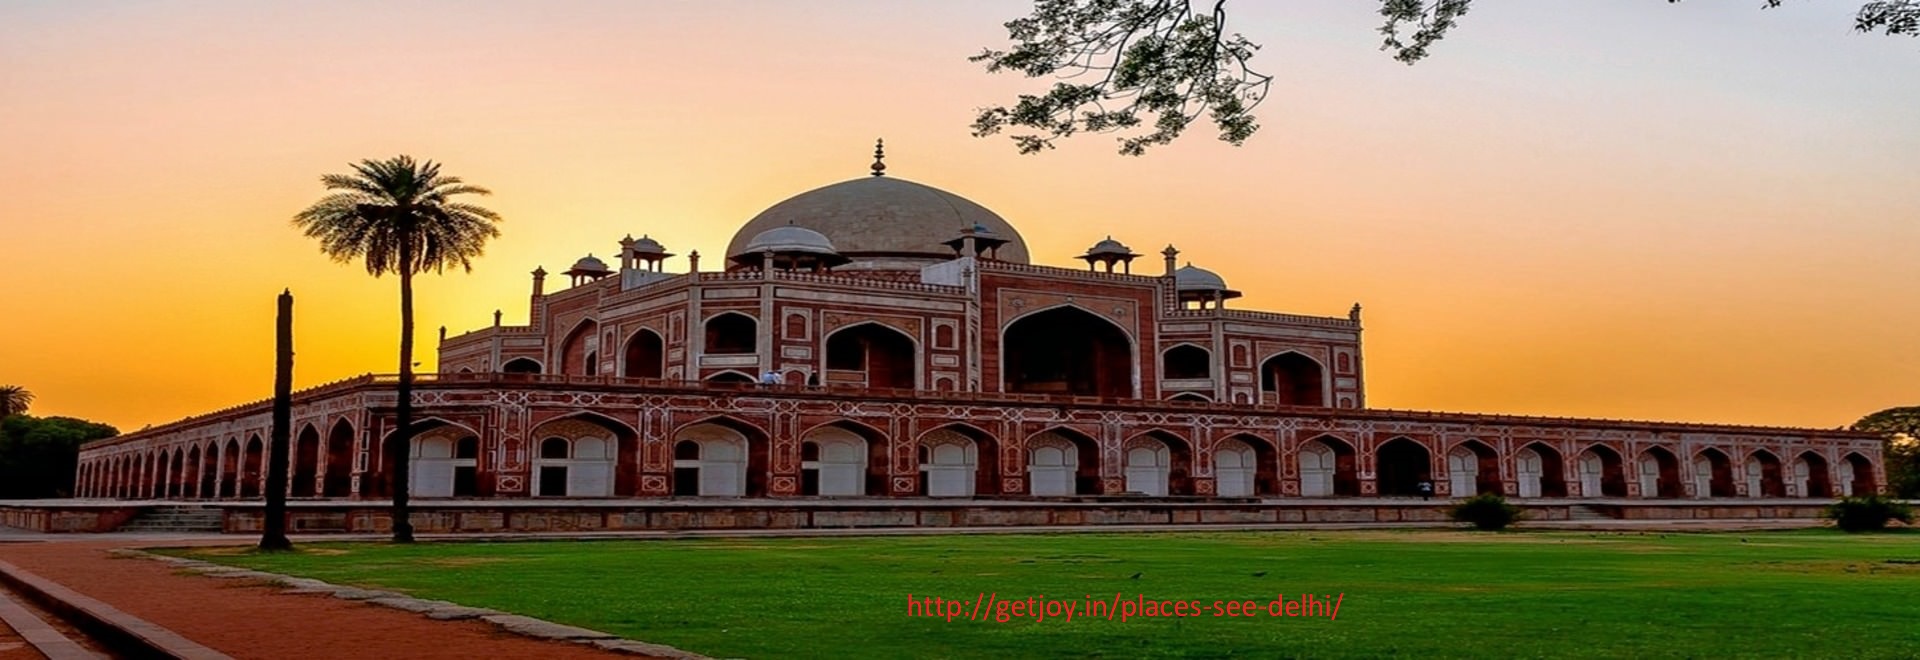 Some Places to see in Delhi - Get Joy